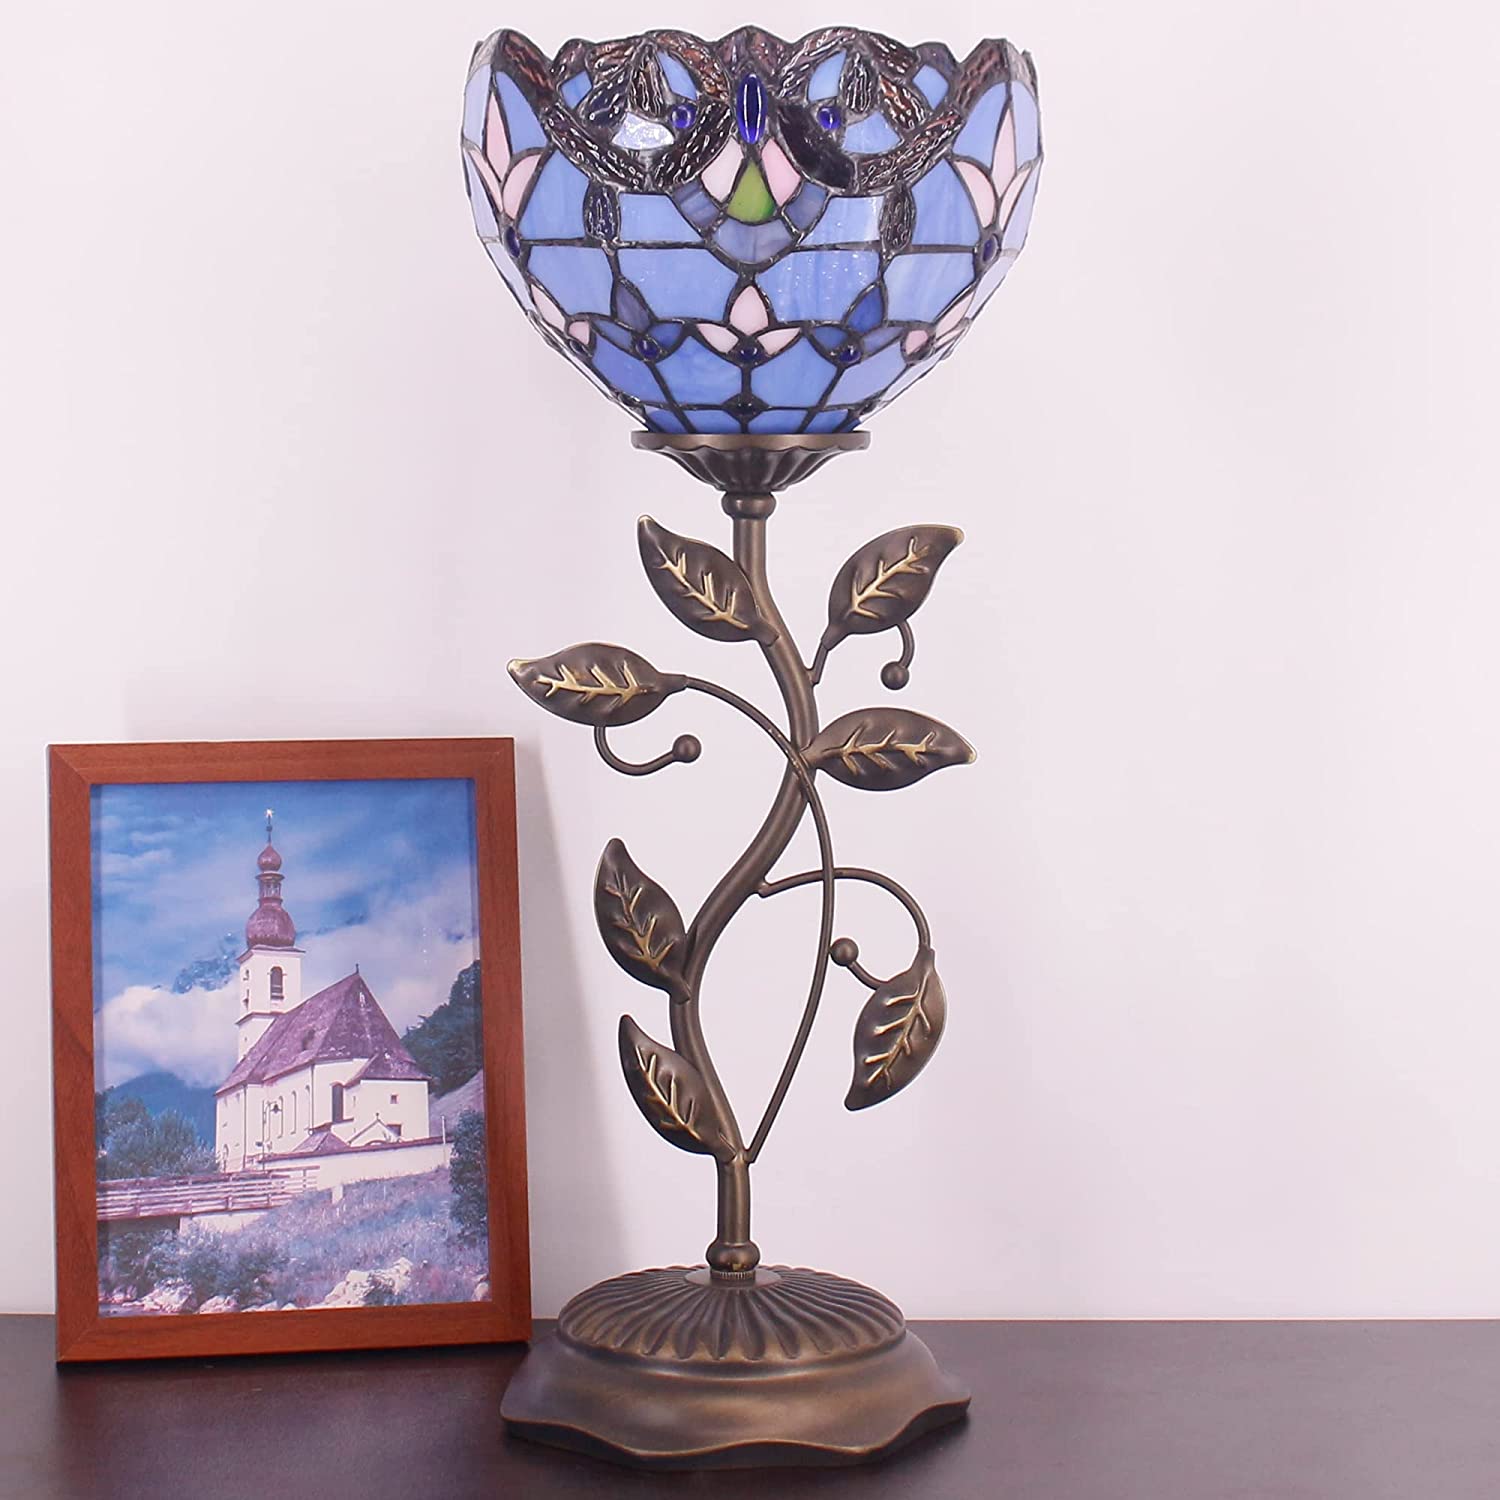 WERFACTORY Small Tiffany Table Lamp 8" Stained Glass Baroque Style Shade 19" Tall Antique Vintage Metal Leaf Base Mini Bedside Accent Desk Torchiere Uplight